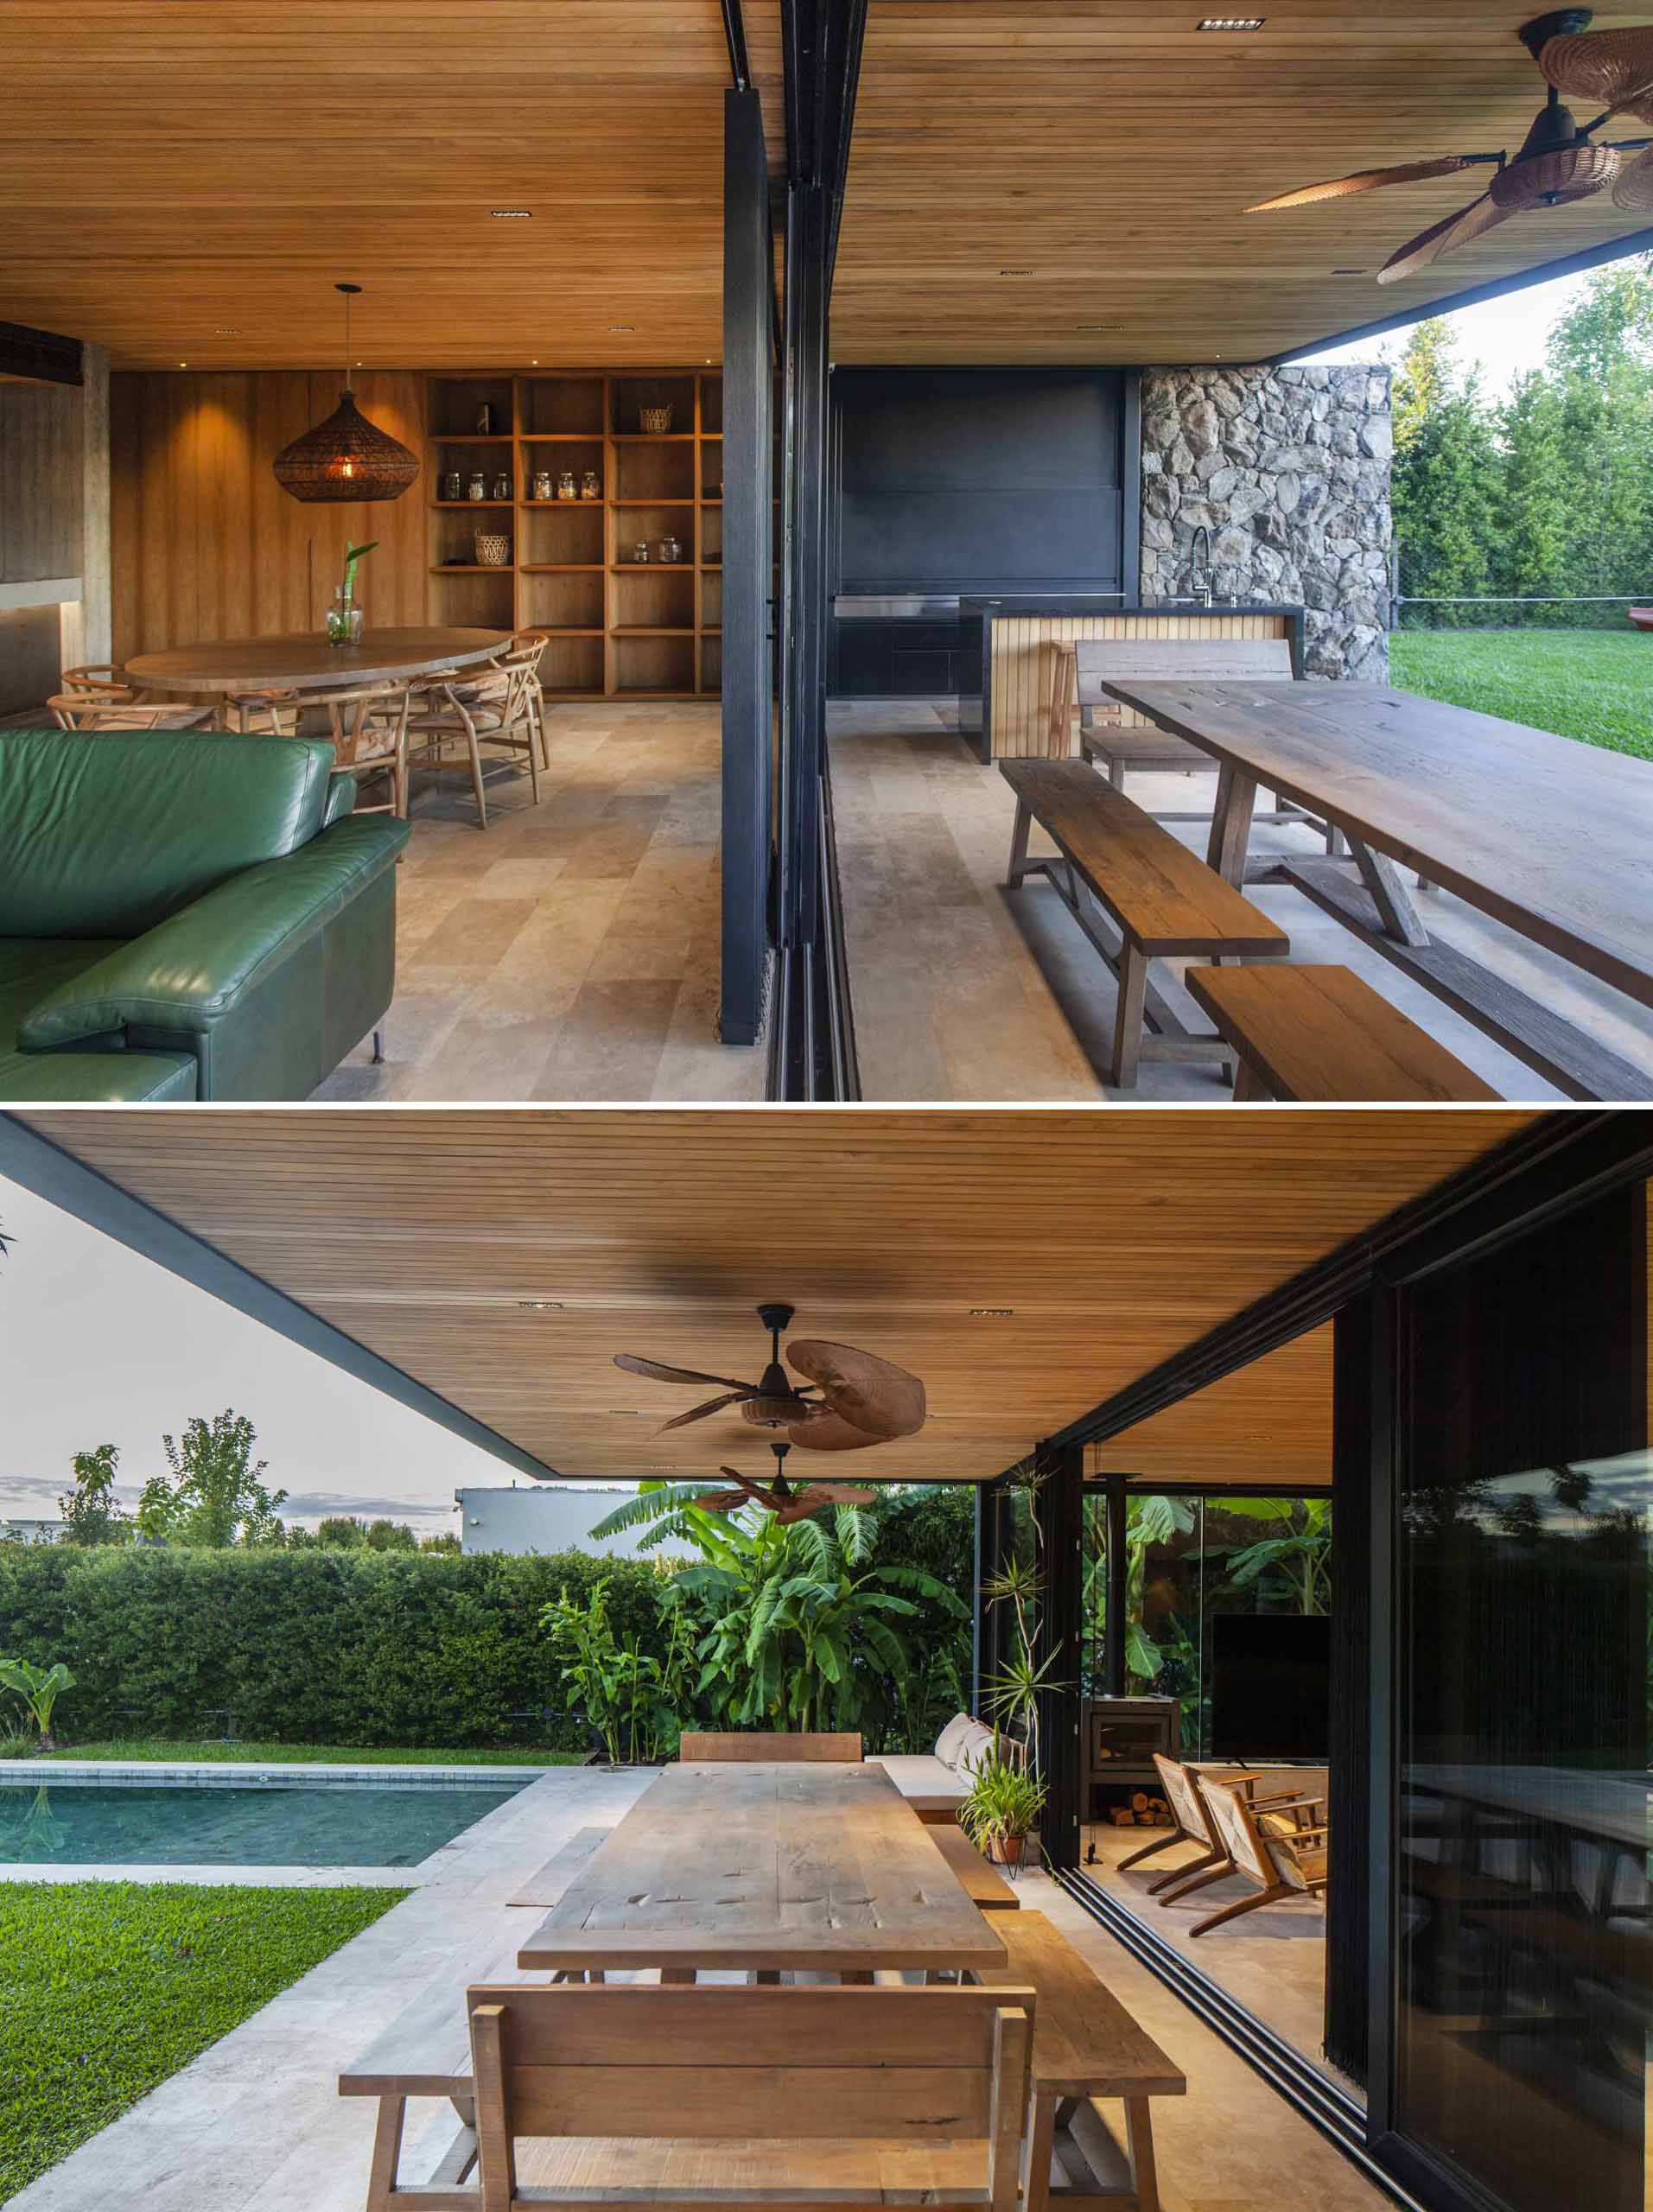 Sliding doors connect the interior and outdoor social spaces of this home.